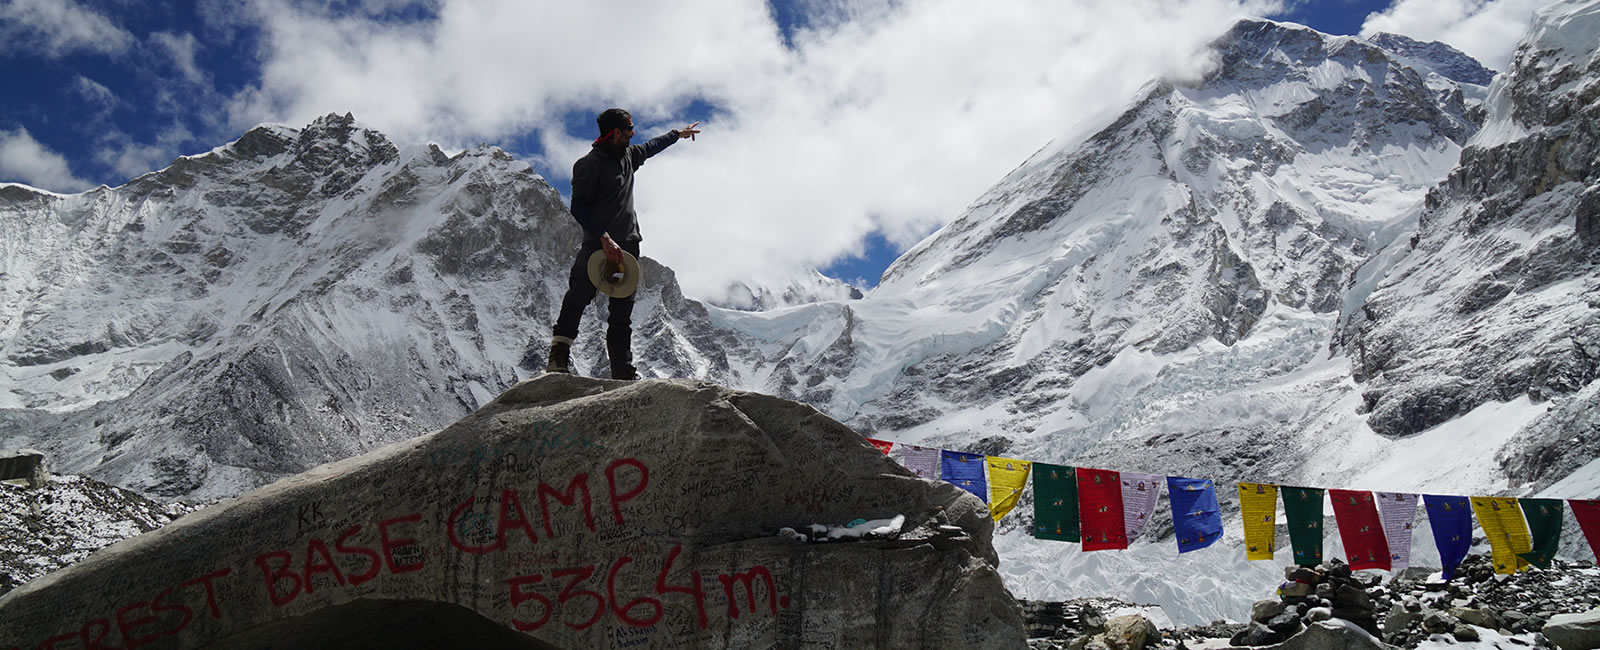 How cold is it during the Everest Base Camp trek 